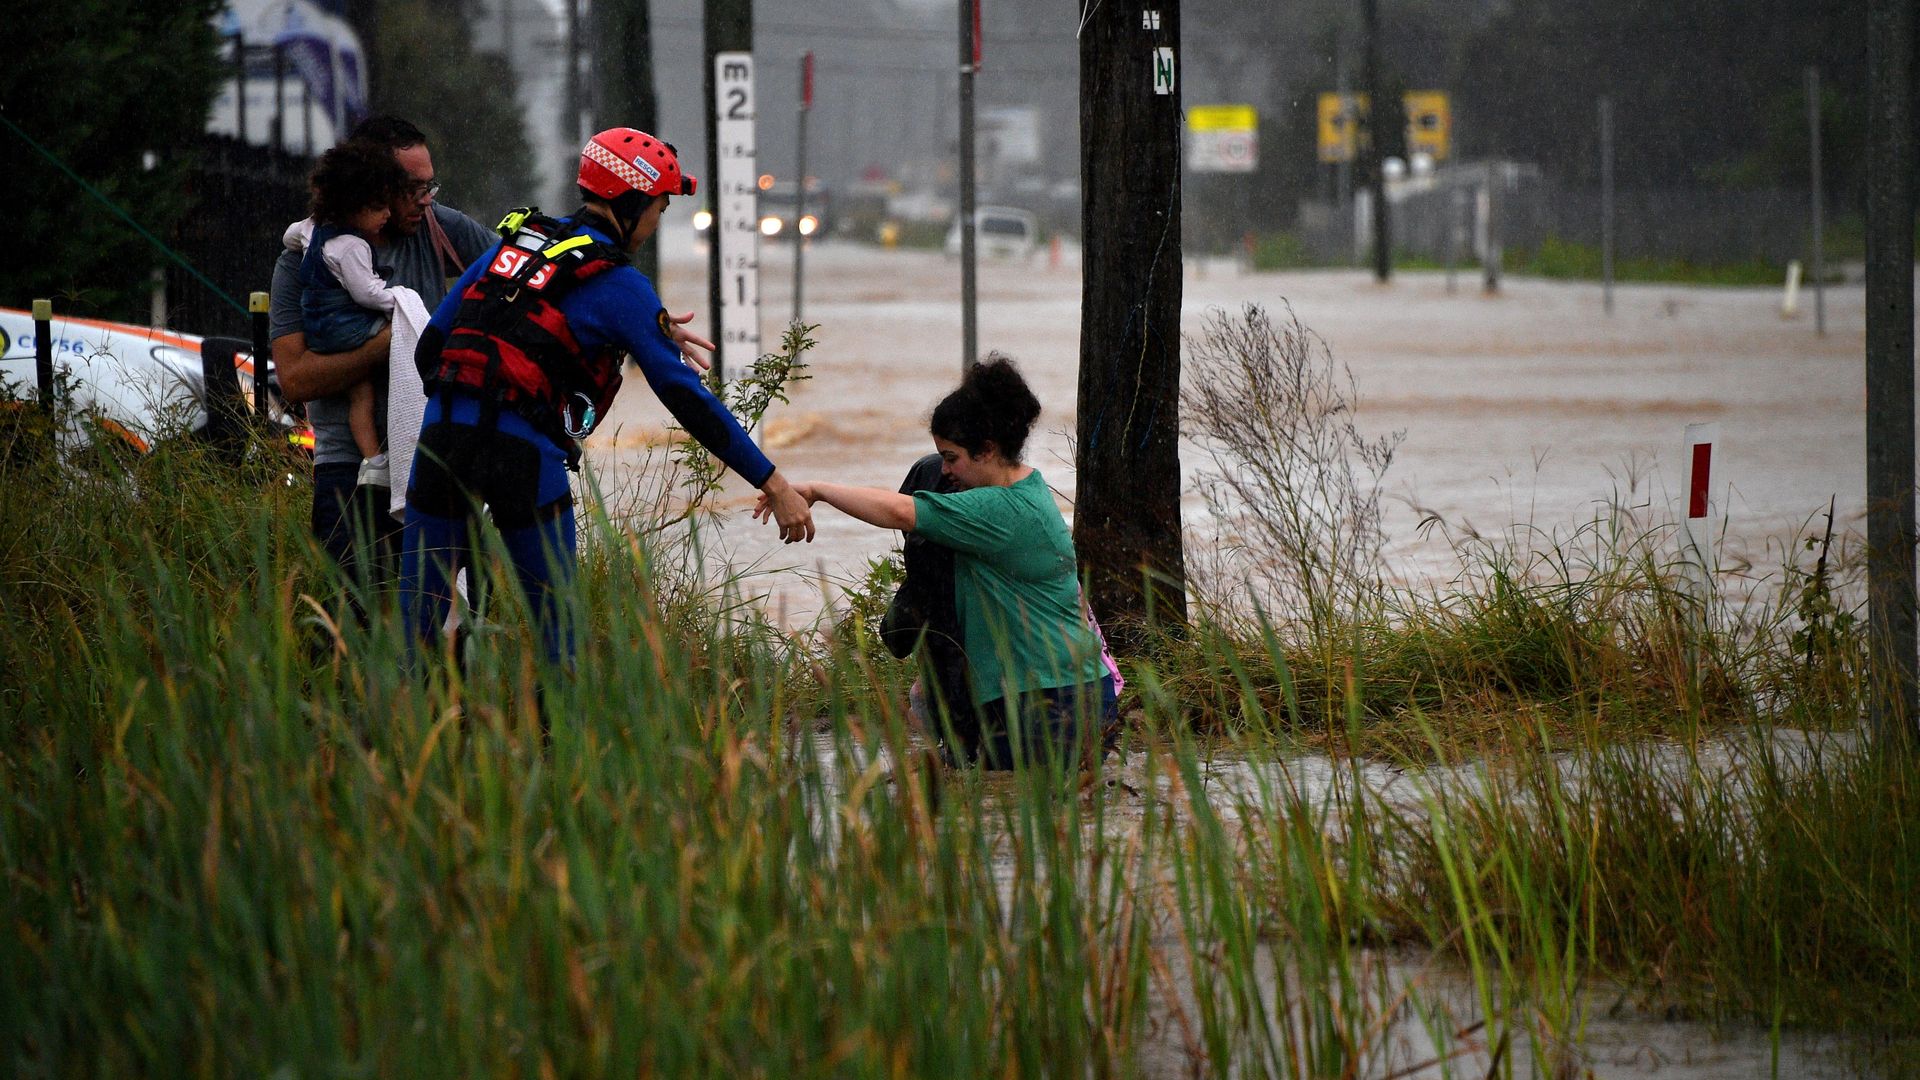 A rescue worker helps residents cross a flooded road during heavy rain in western Sydney on March 20